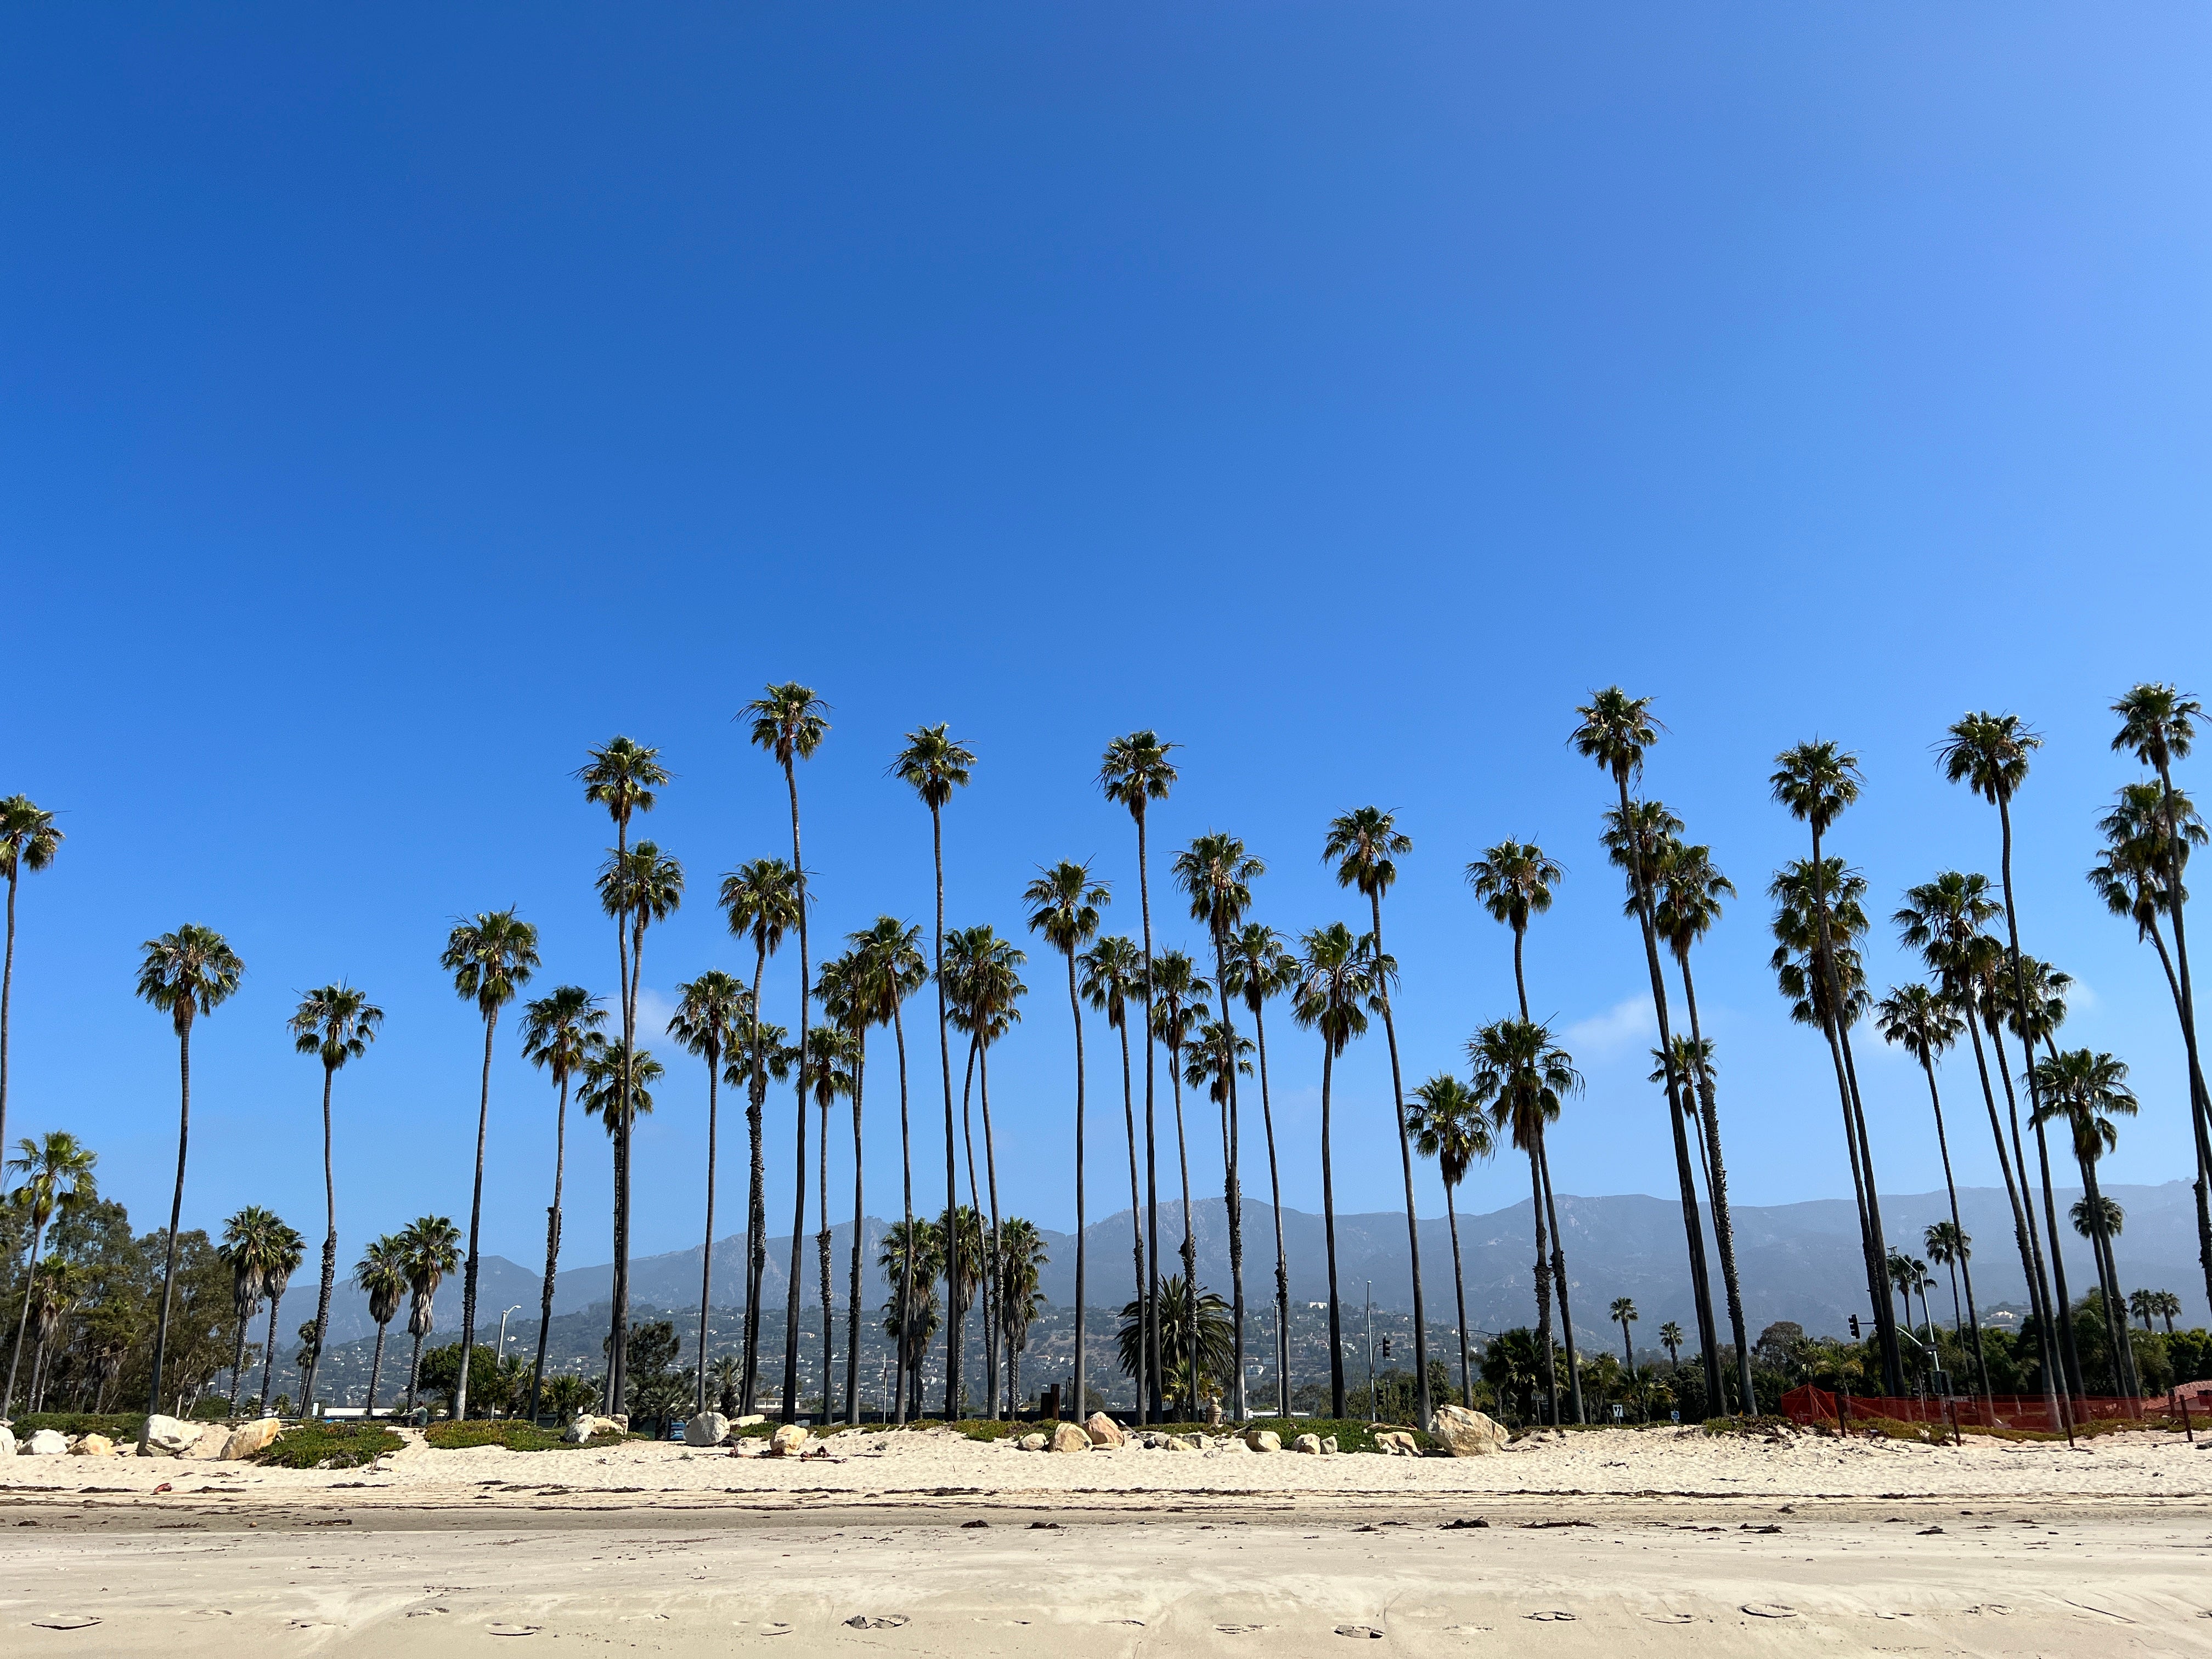 Santa Barbara is known for its tall palms